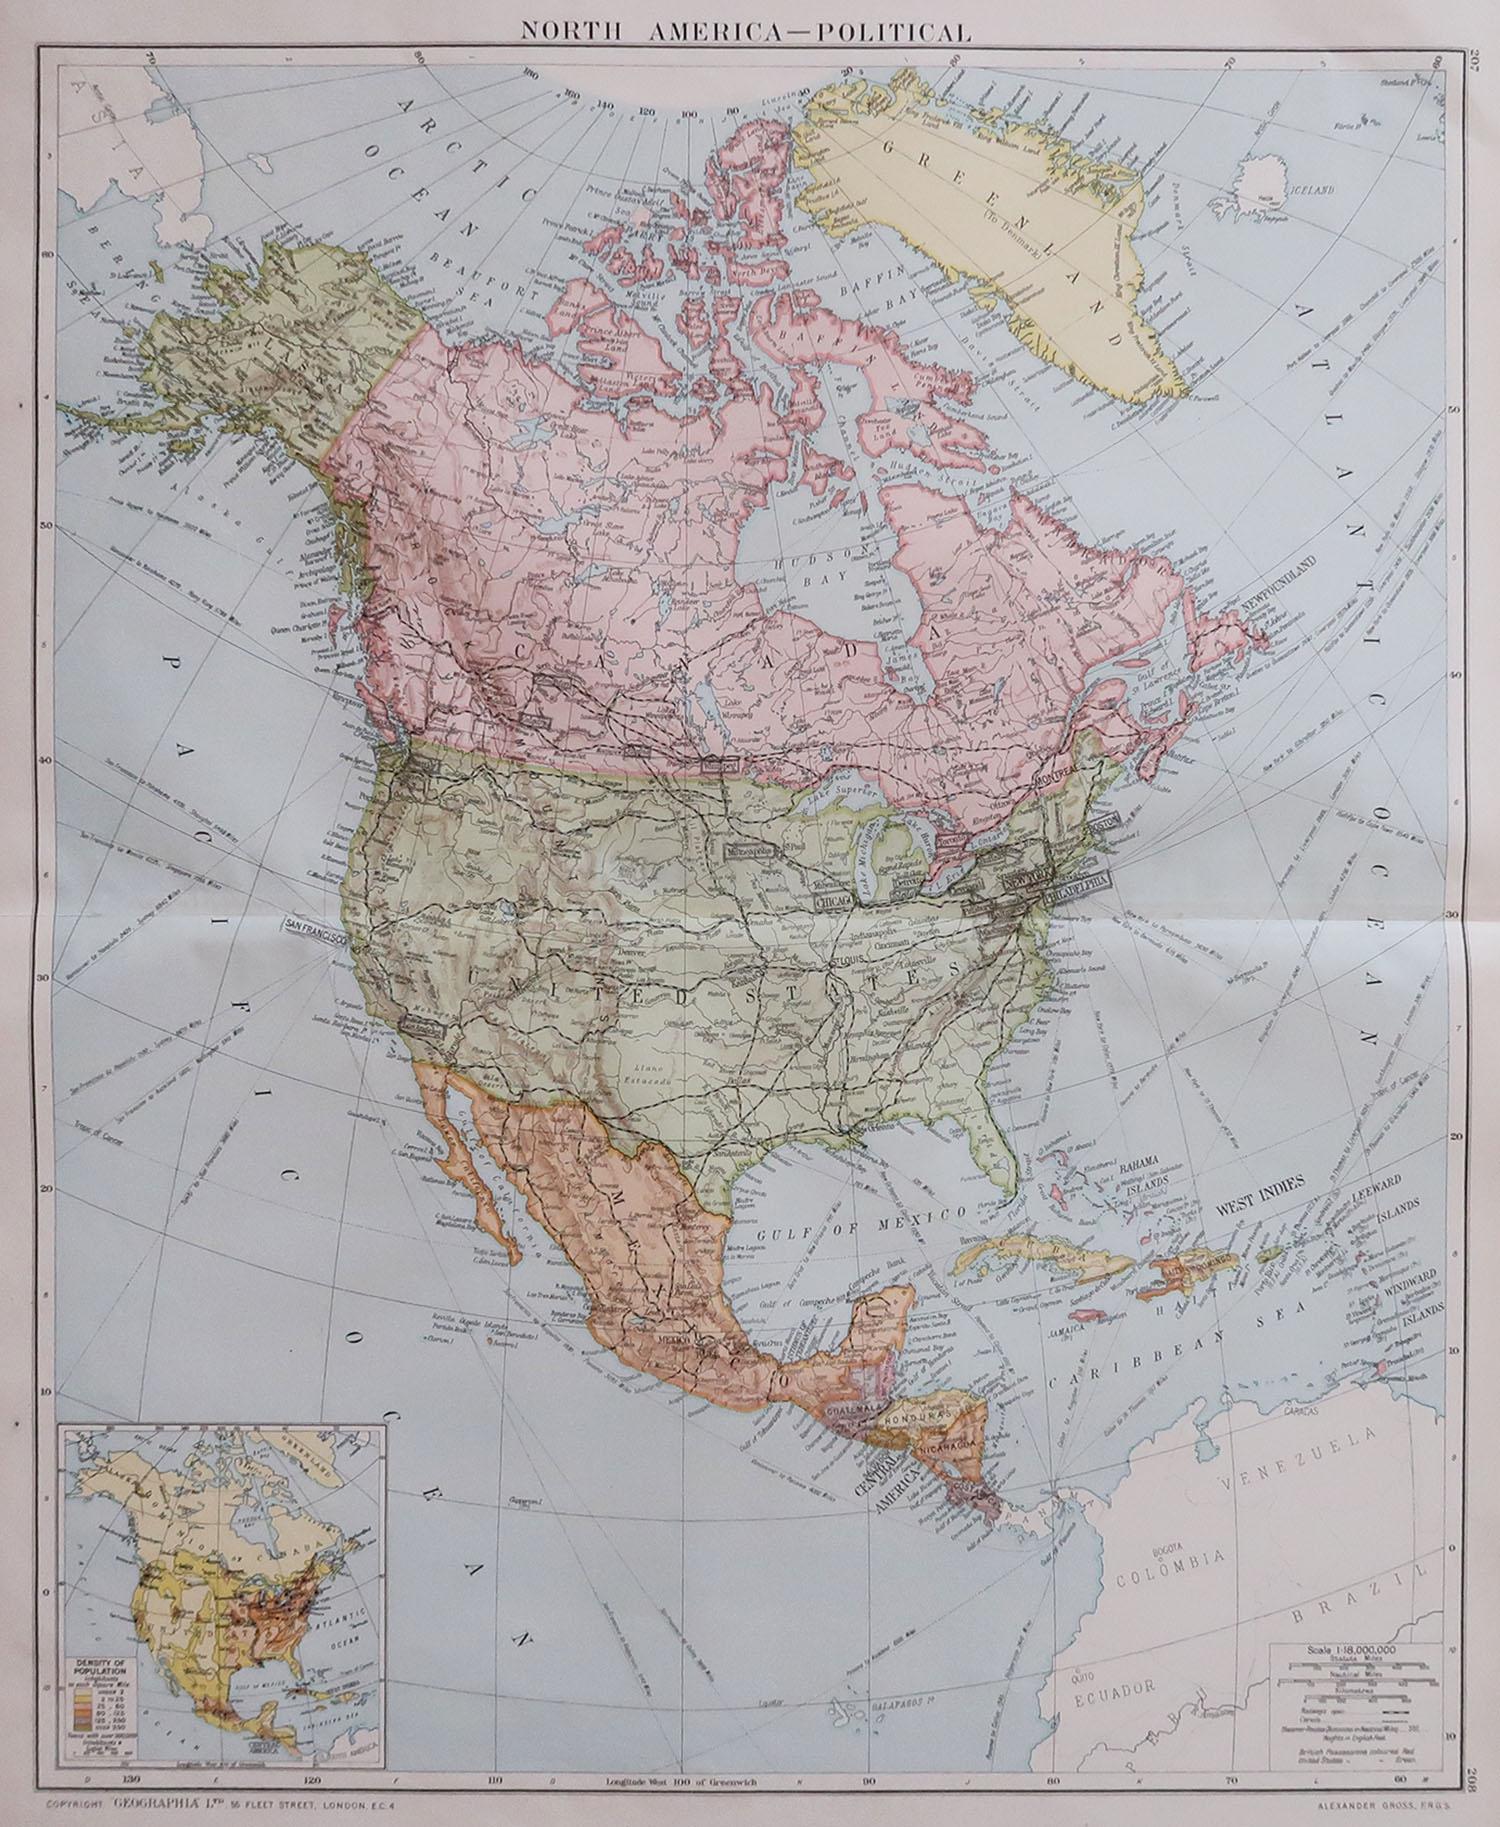 Great map of North America

Original color. Good condition

Published by Alexander Gross

Unframed.








 